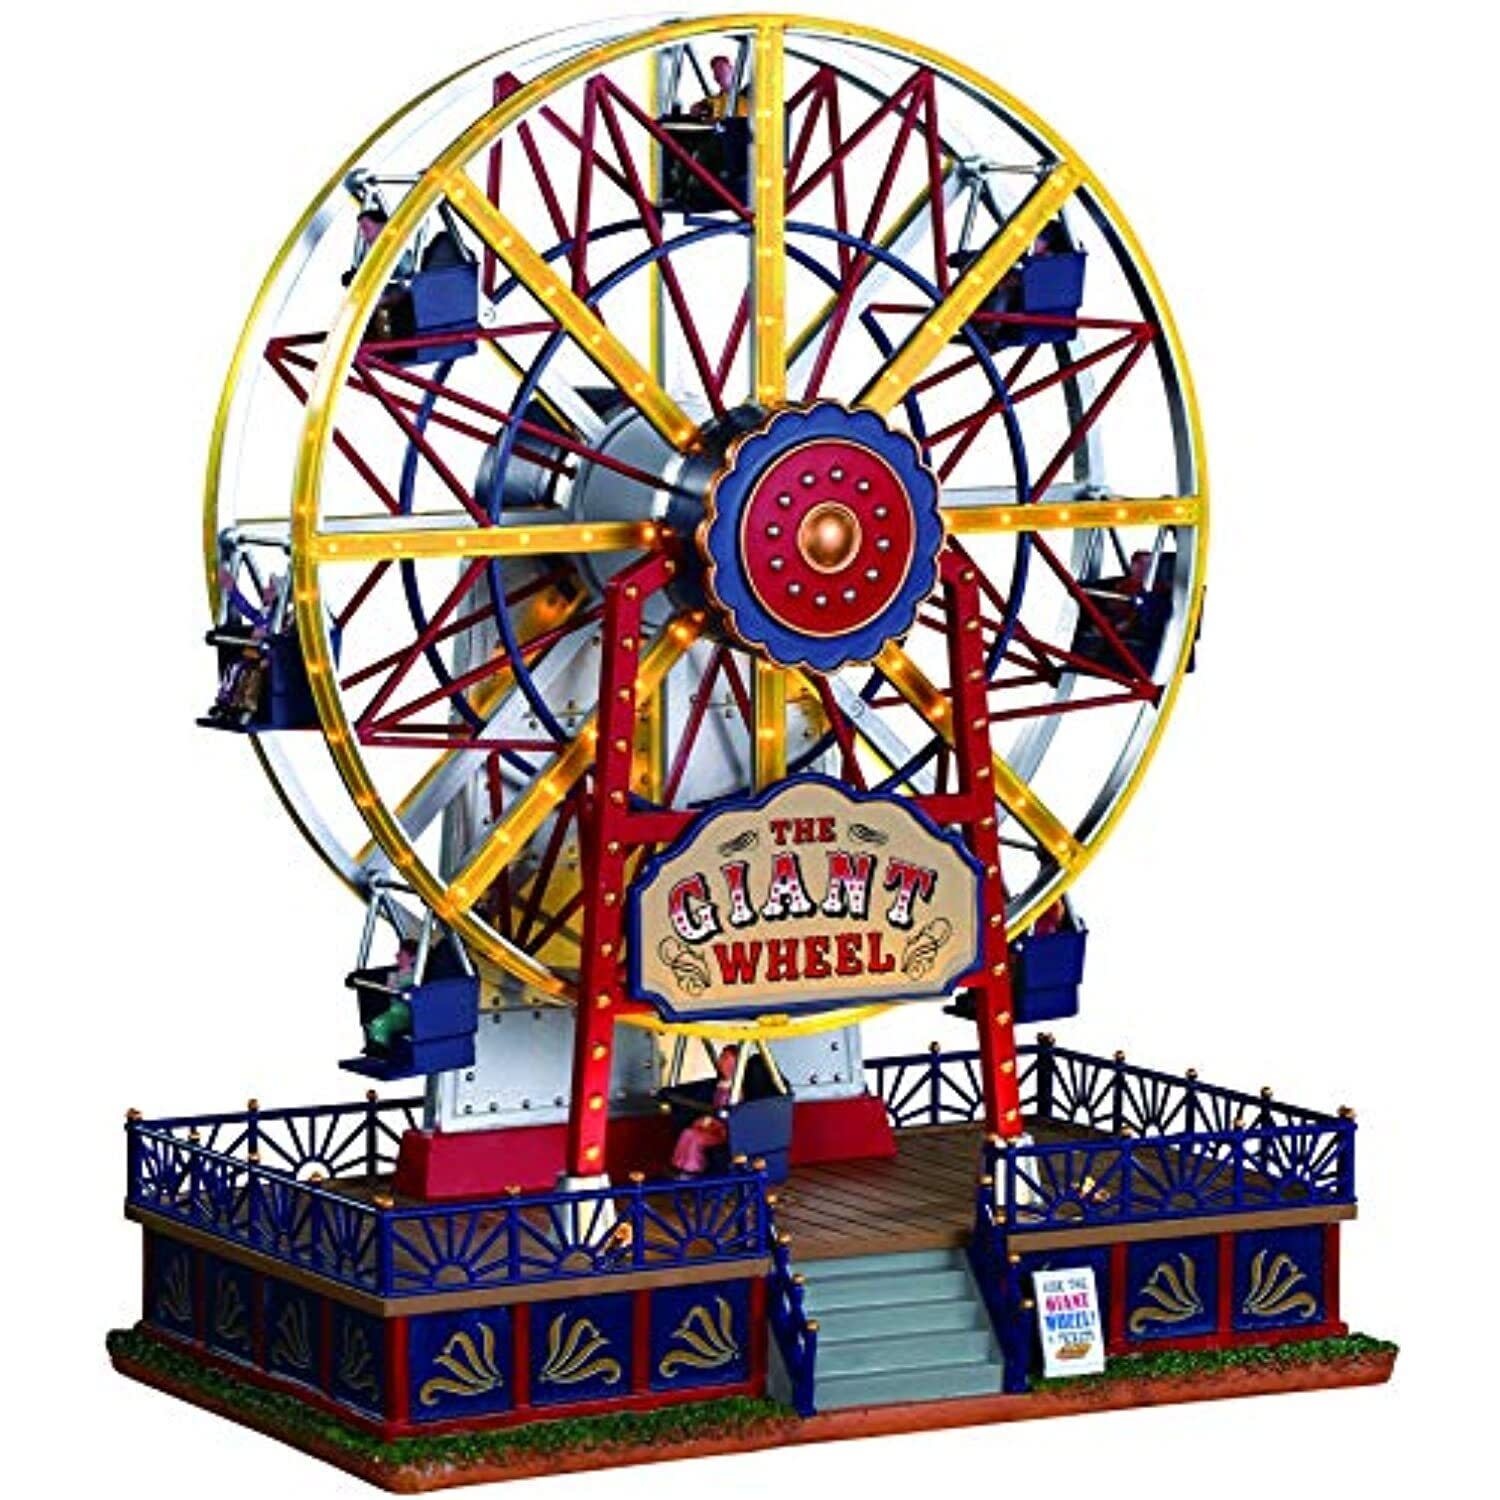 Lemax Lemax The Giant Wheel